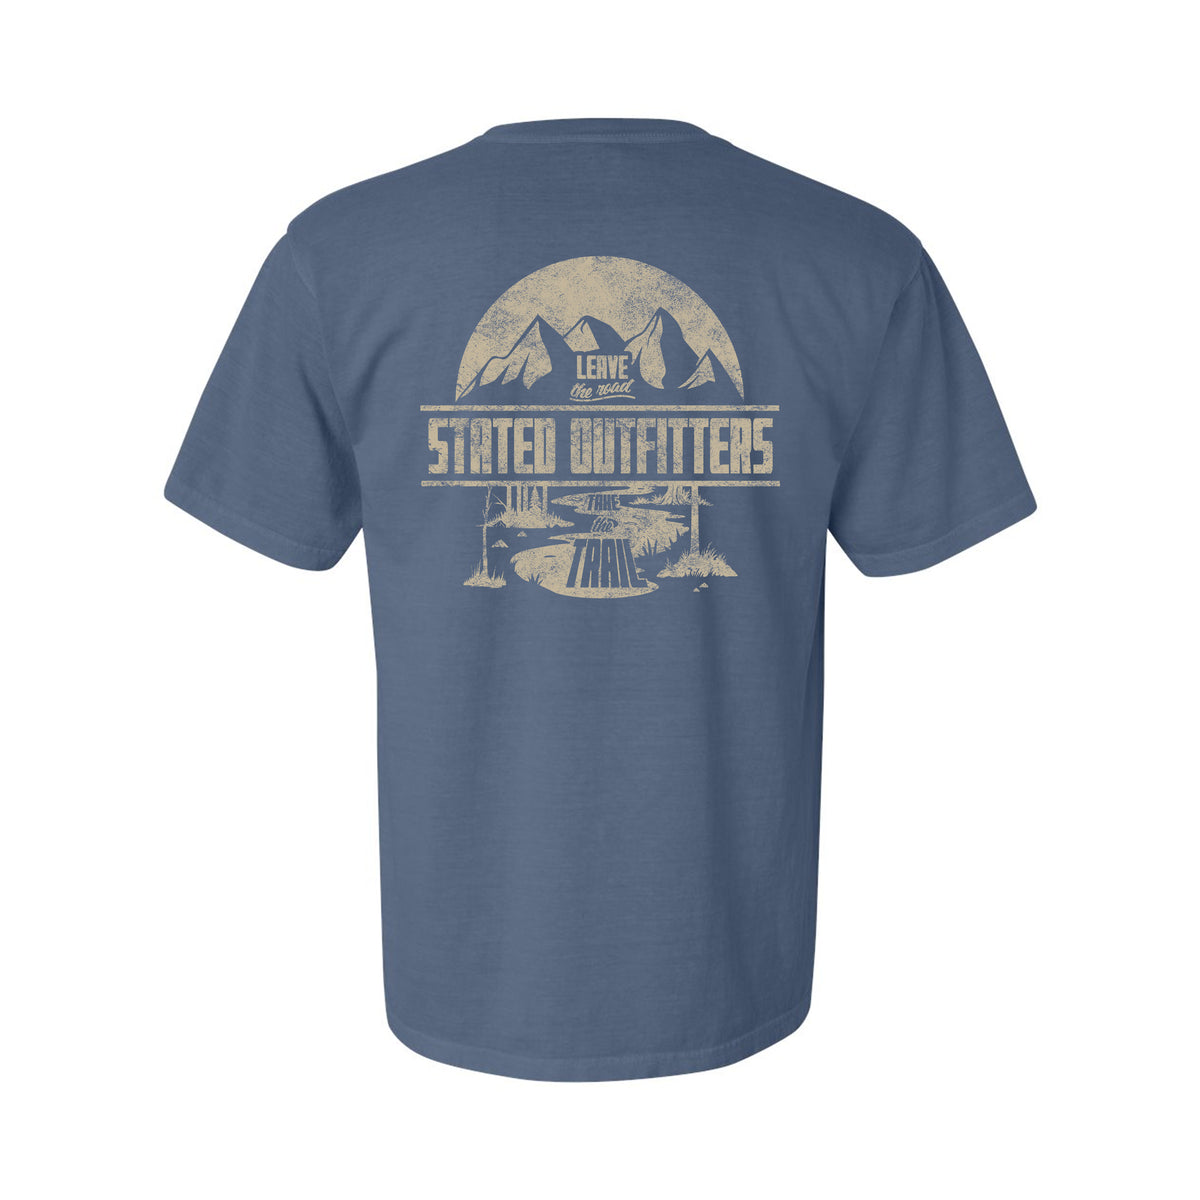 Stated Outfitters Take The Trail T-Shirt